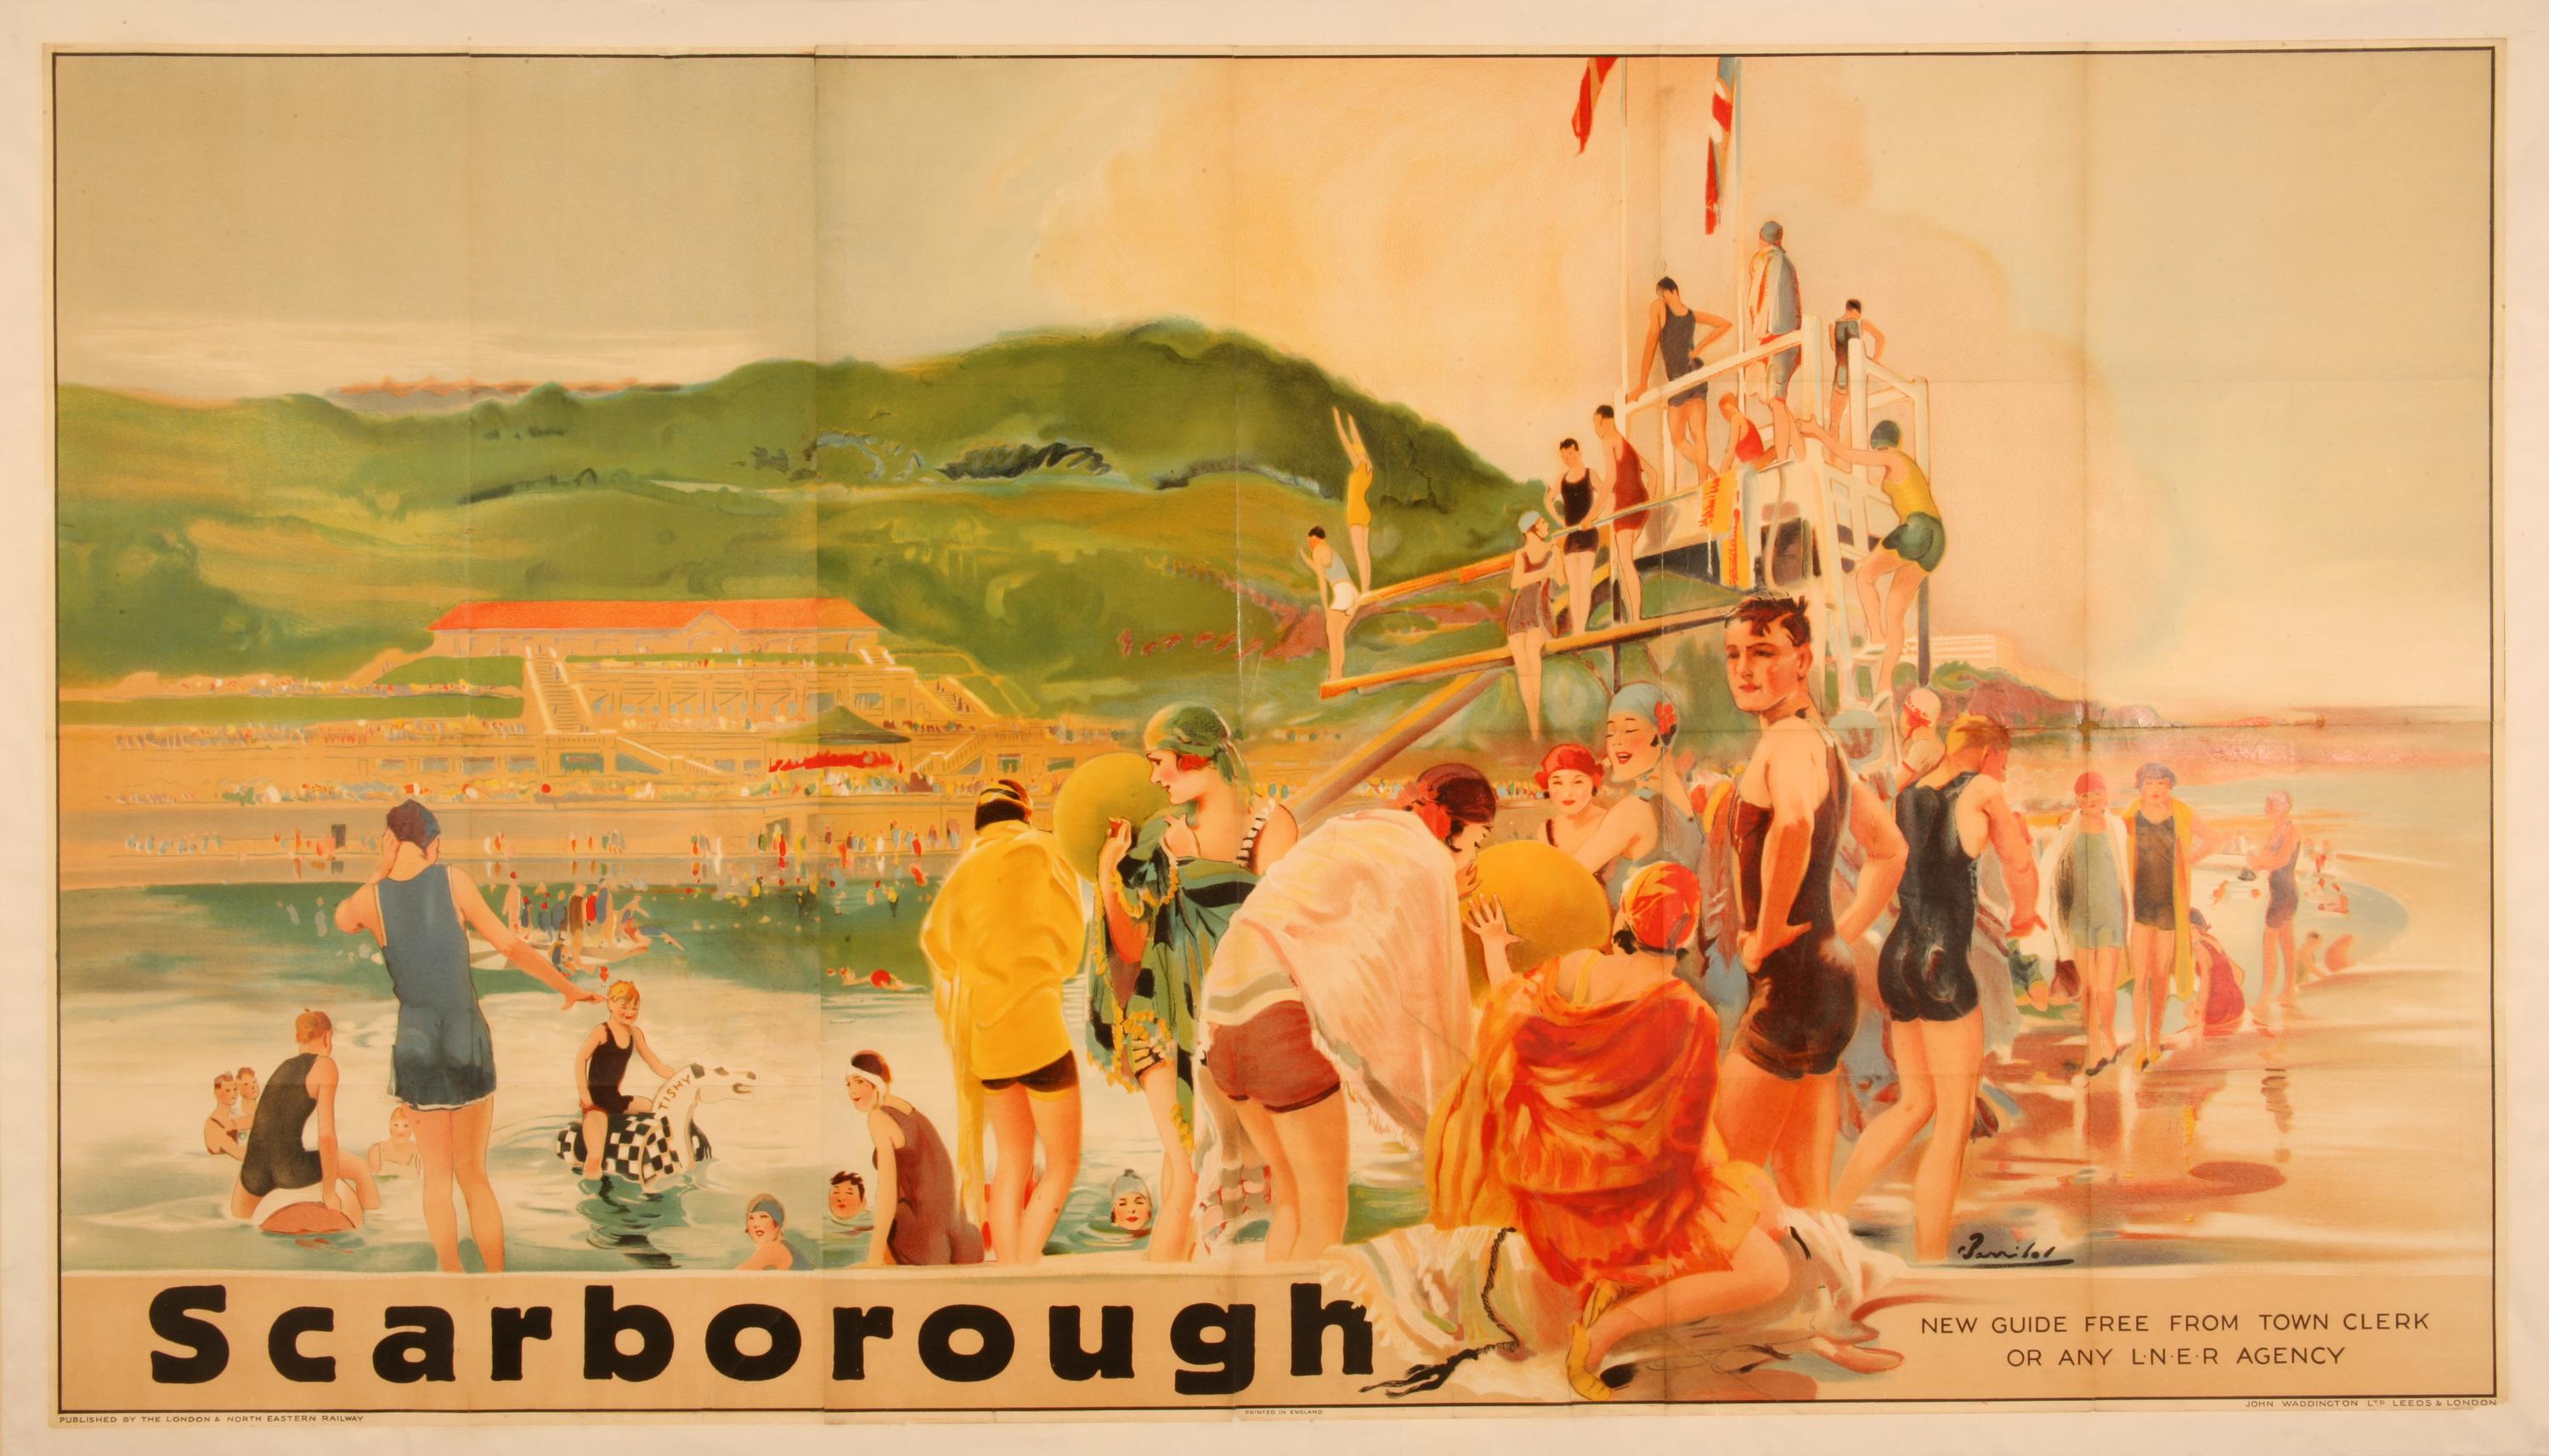 London & North Eastern Railway poster of Scarborough by William H Barribal, c. 1925, depicting bathers